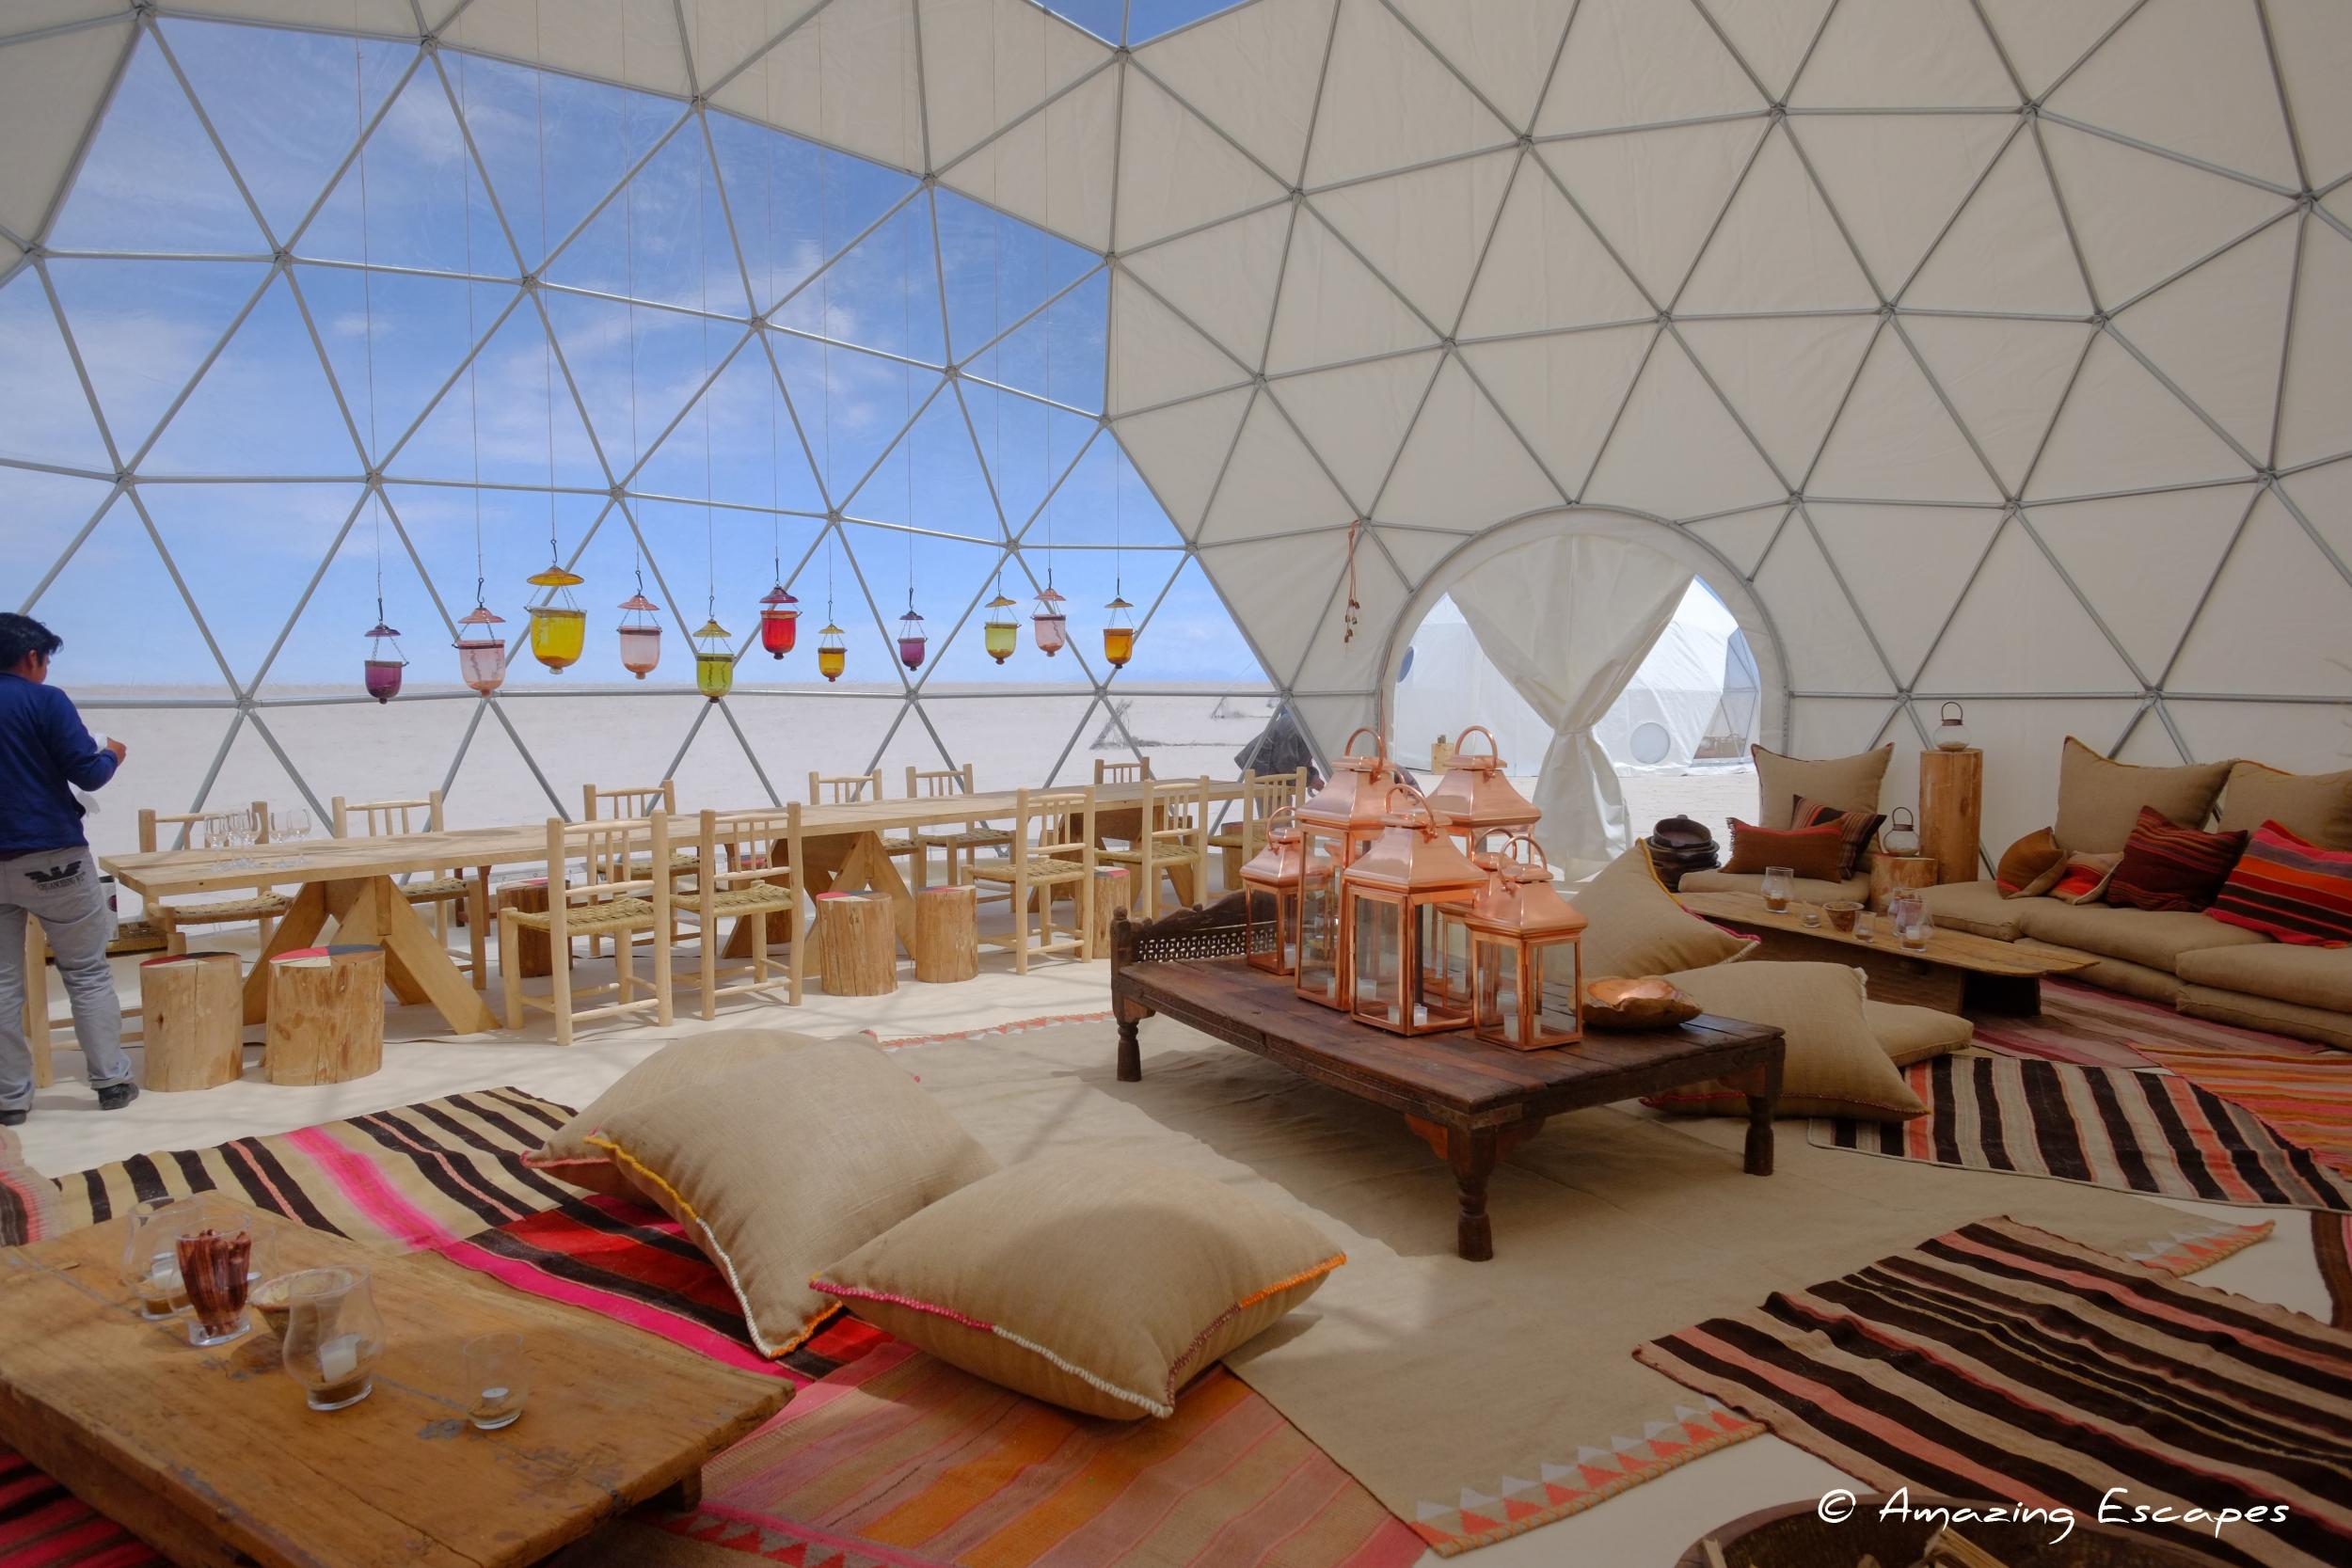 These astonishing domes offer views of the flats and the starry night sky